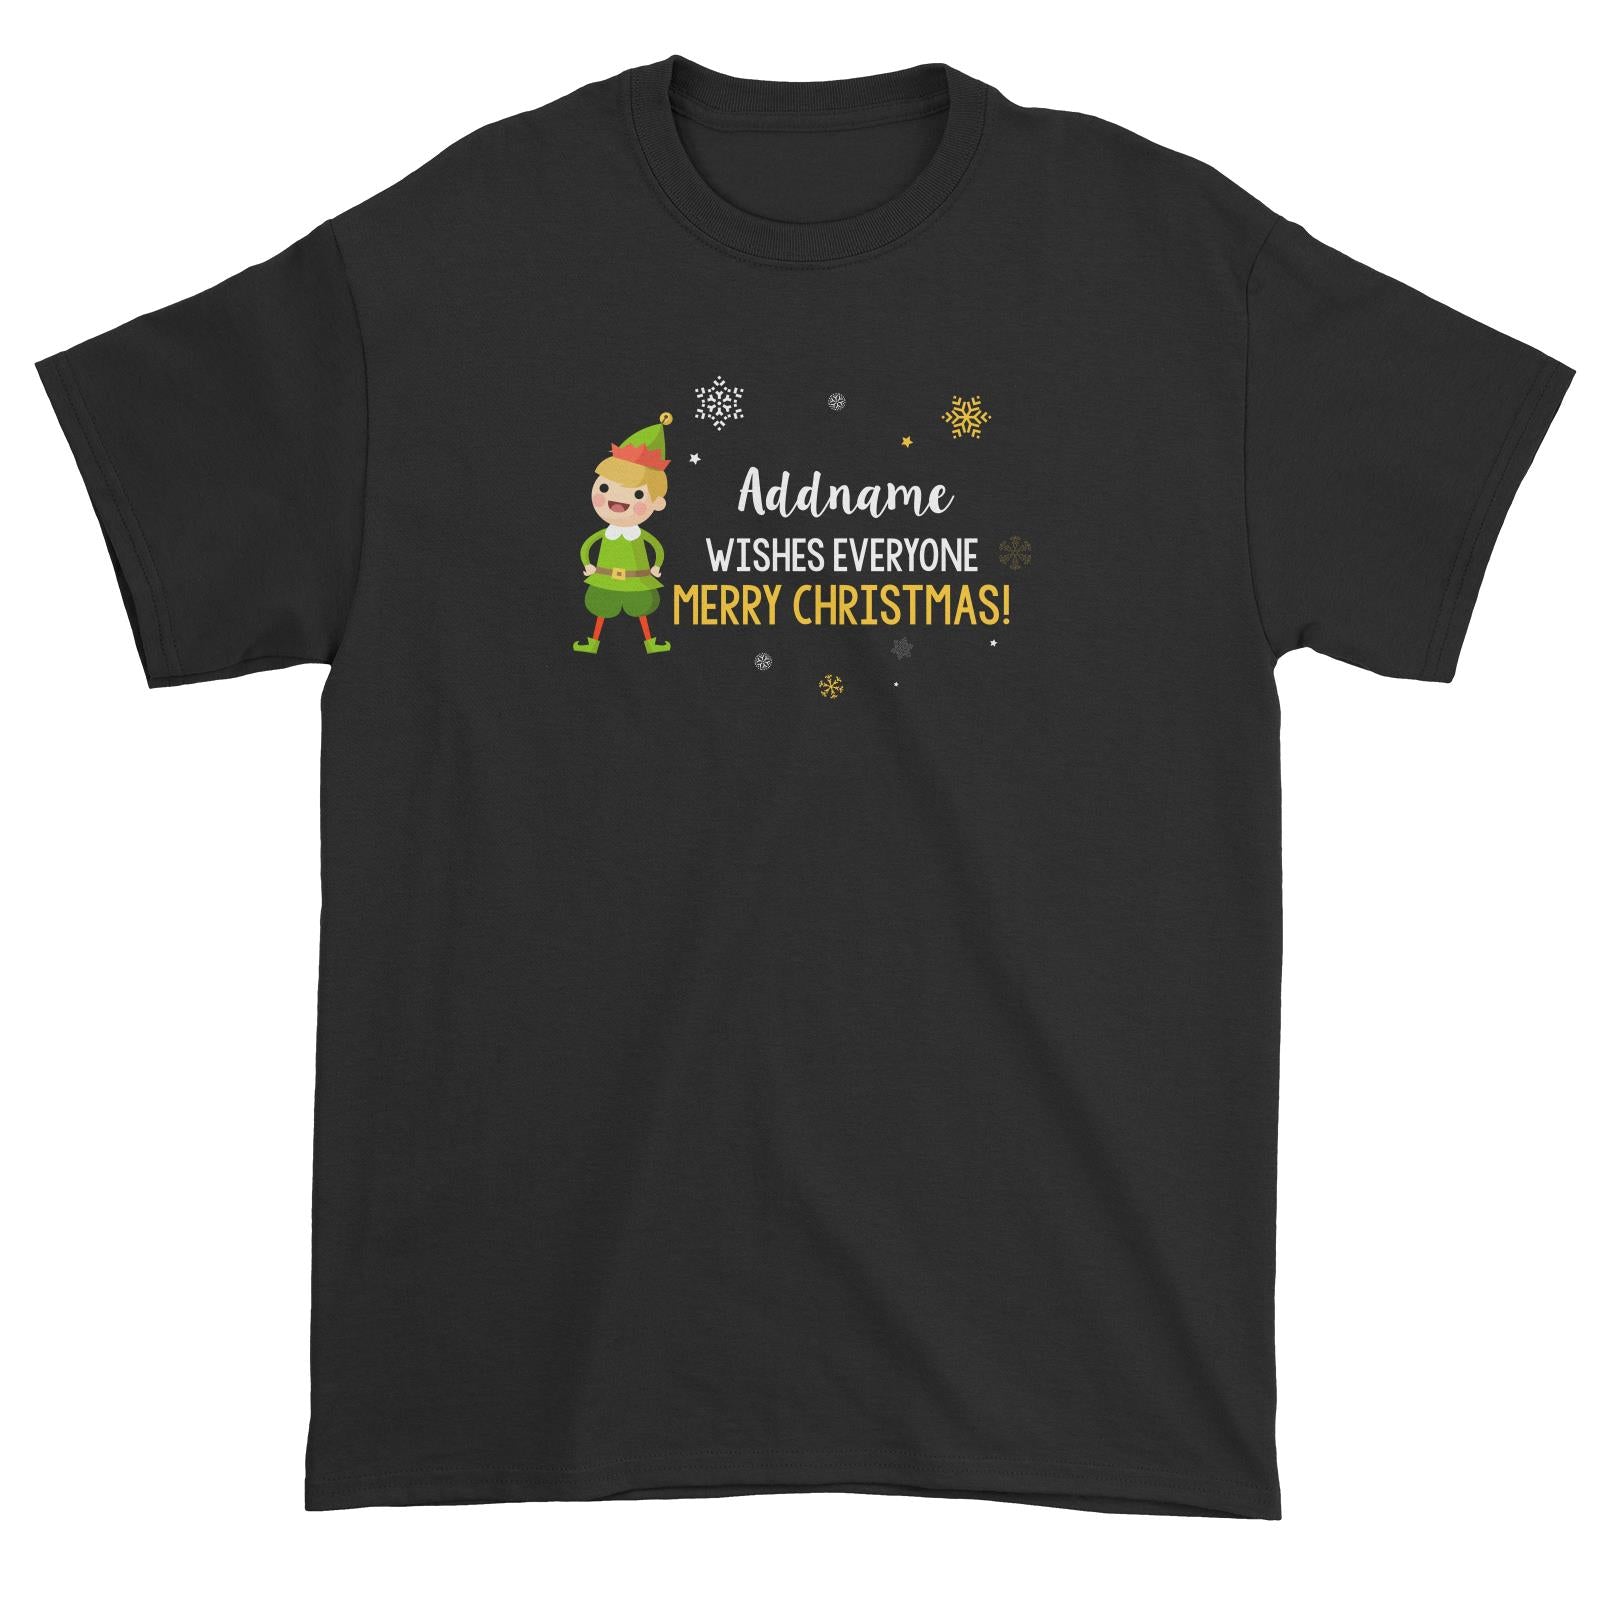 Cute Elf Boy Wishes Everyone Merry Christmas Addname Unisex T-Shirt  Matching Family Personalizable Designs